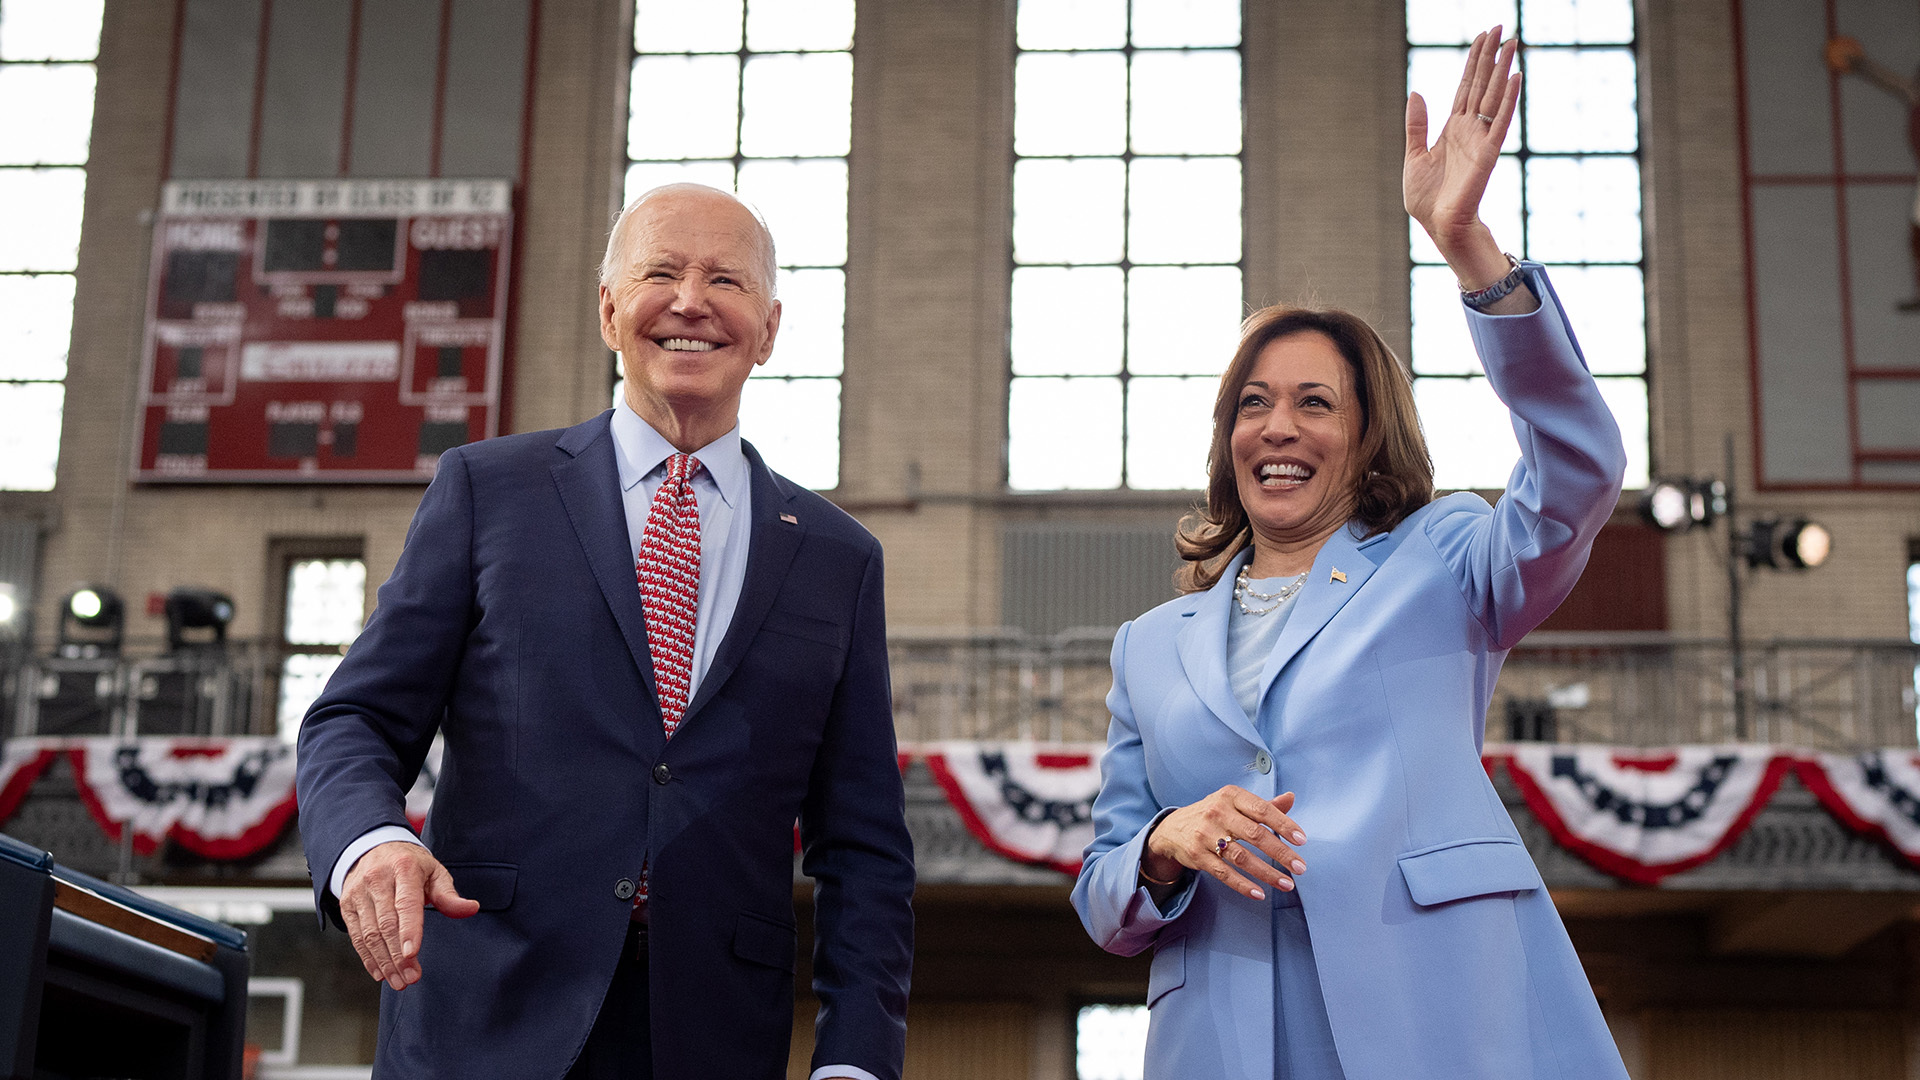 The media and Republicans labeled Vice President Harris "border czar." Now that Biden has dropped out, outlets are changing their stories.